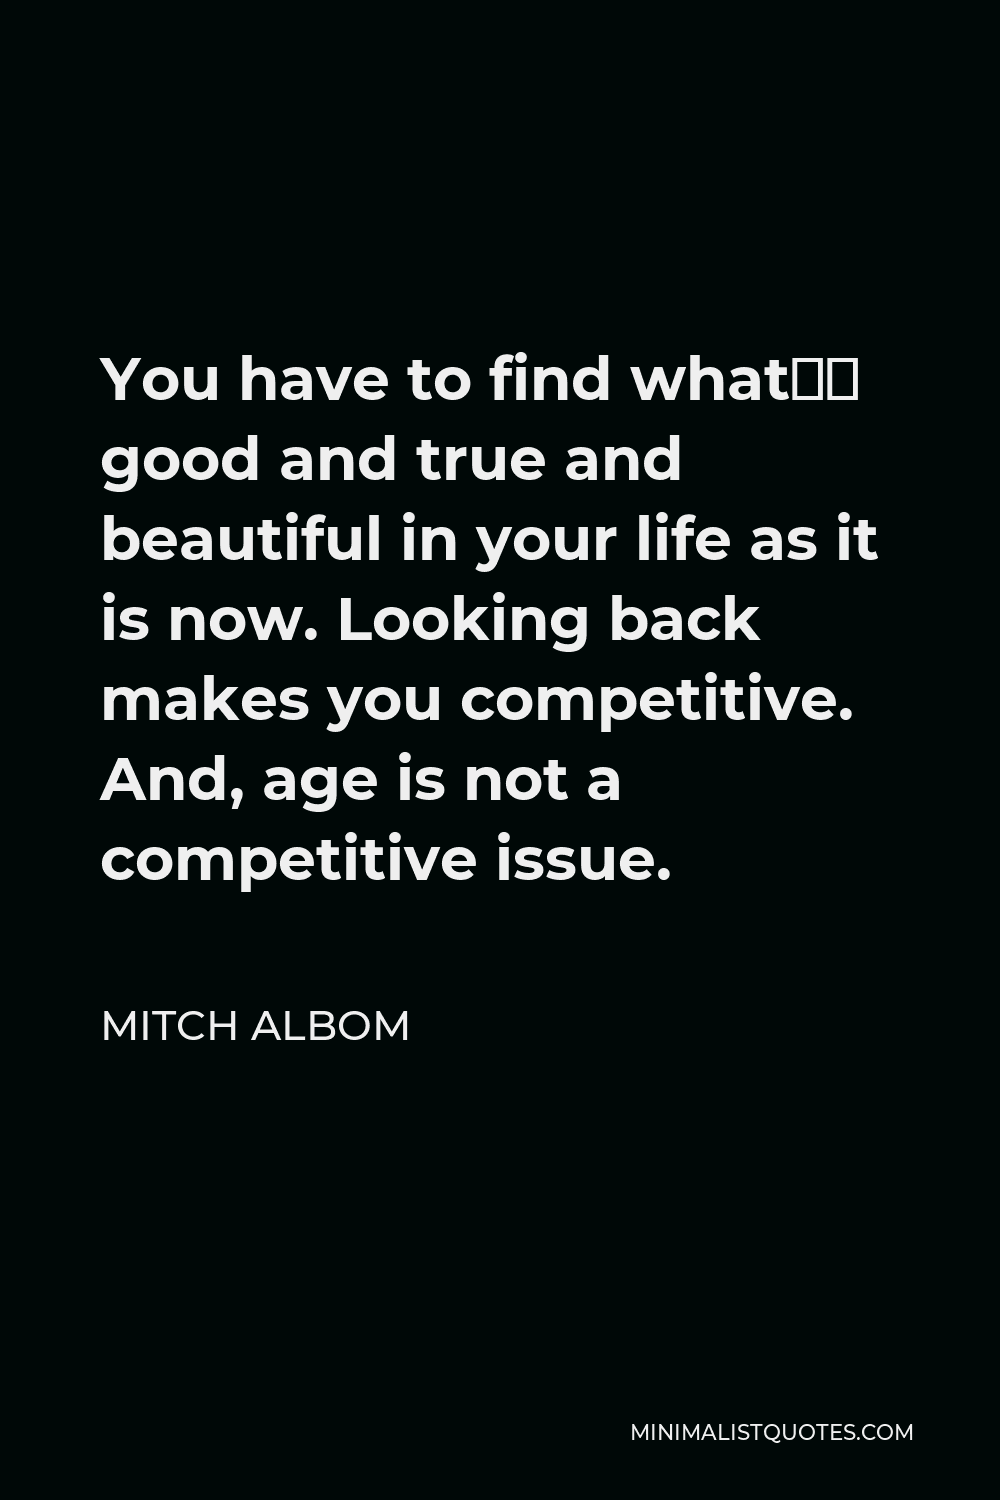 Mitch Albom Quote - You have to find what’s good and true and beautiful in your life as it is now. Looking back makes you competitive. And, age is not a competitive issue.